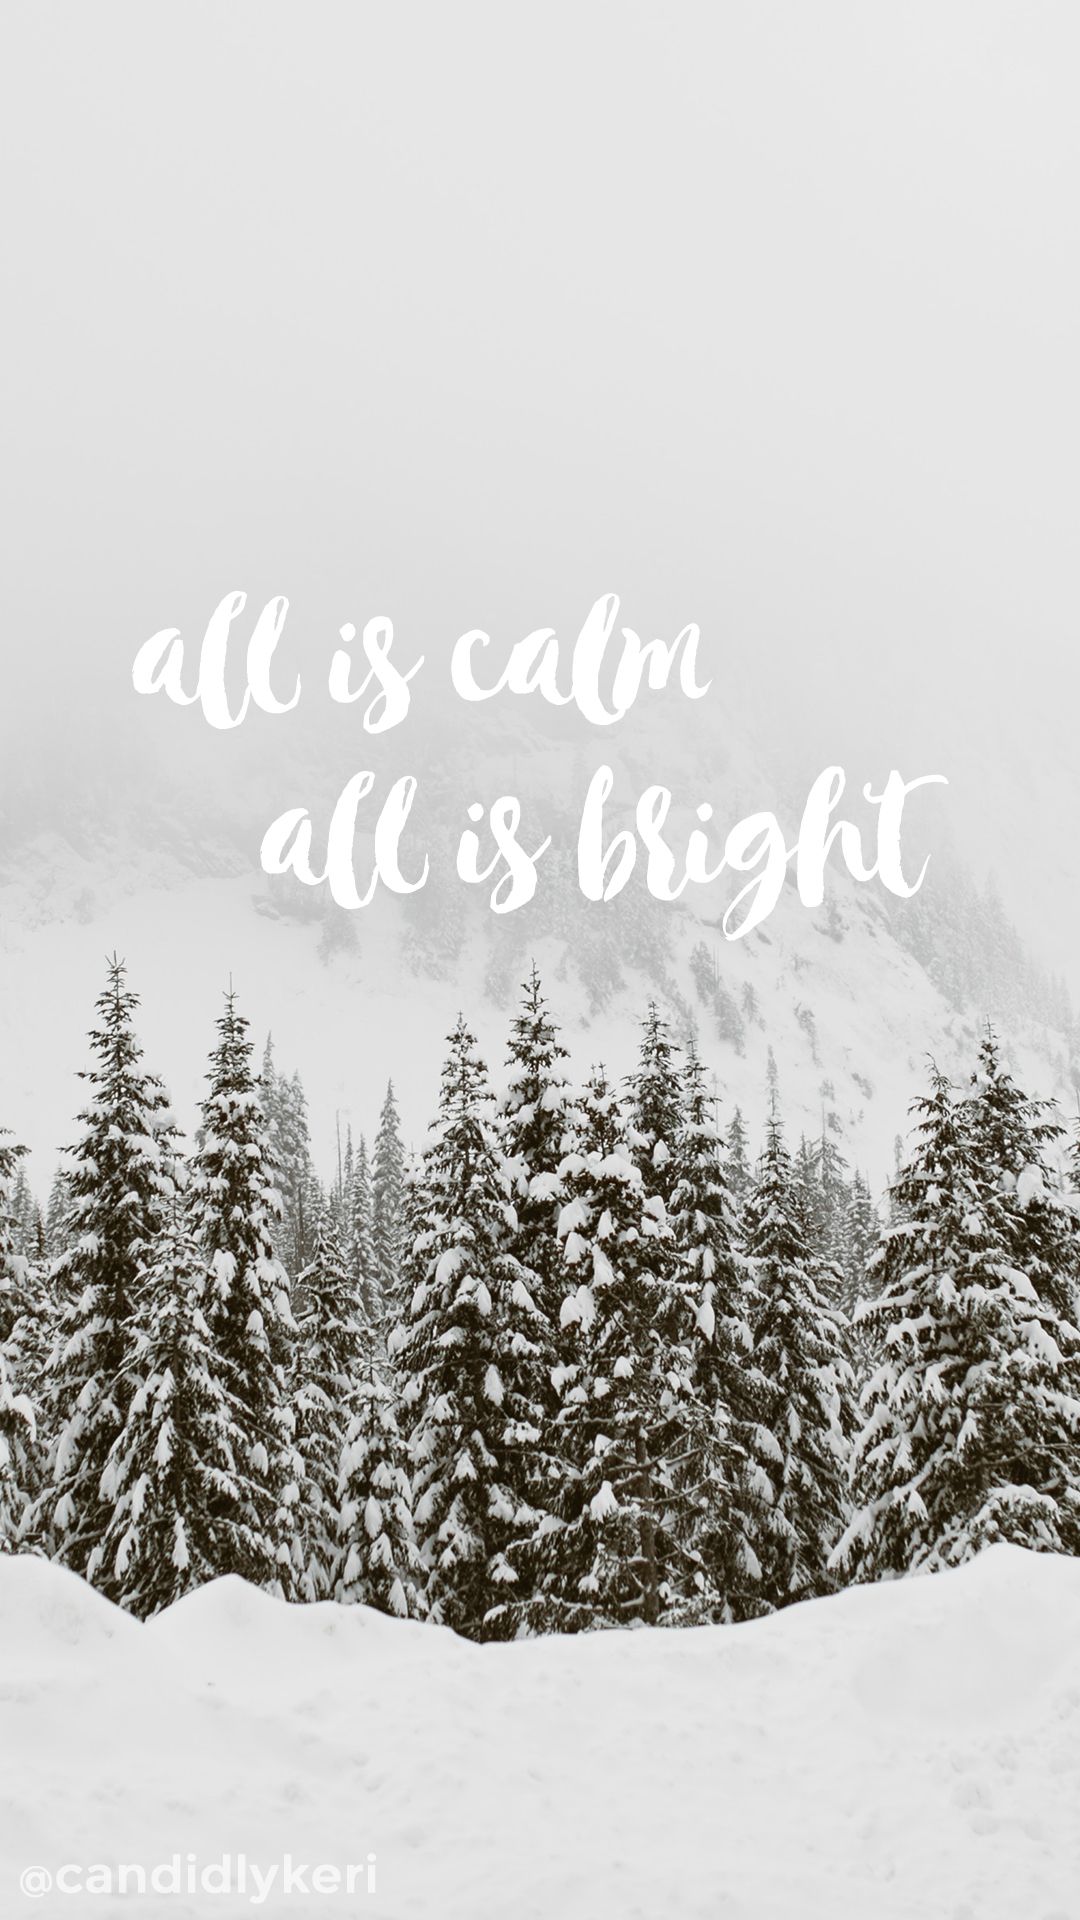 all is calm all is bright background wallpaper you can download for free on the blog. Wallpaper iphone christmas, Christmas wallpaper, Christmas phone wallpaper